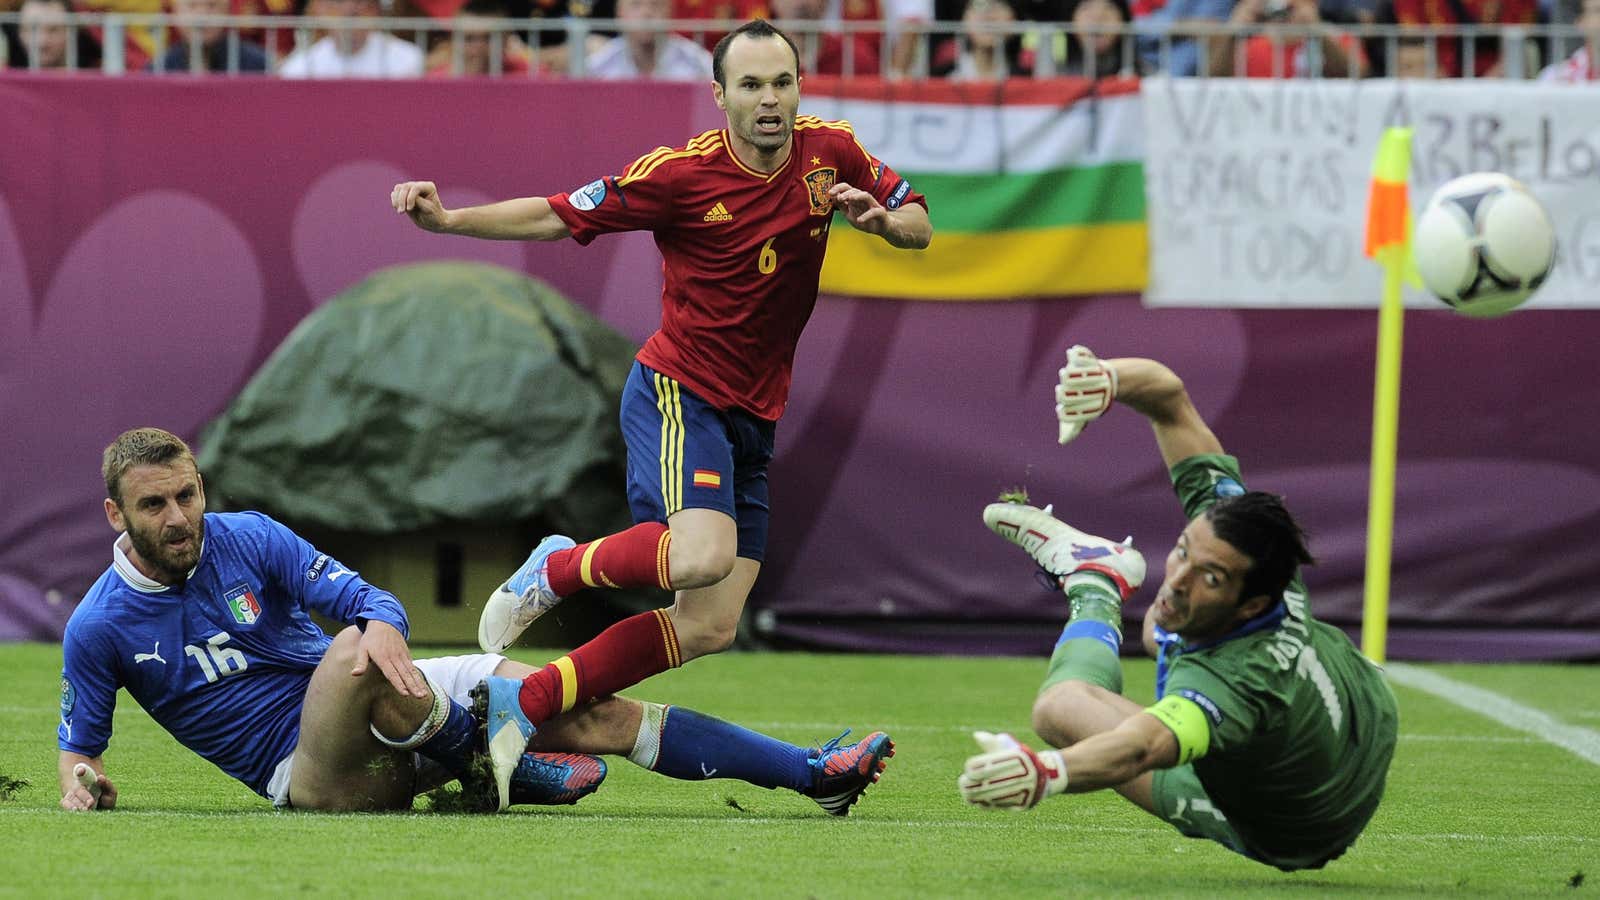 Mixed emotions: Spain’s Andres Iniesta fails to score during the Euro 2012 soccer championship Group C match between Spain and Italy. The Euro Cup 2020 will be held in 13 different cities.